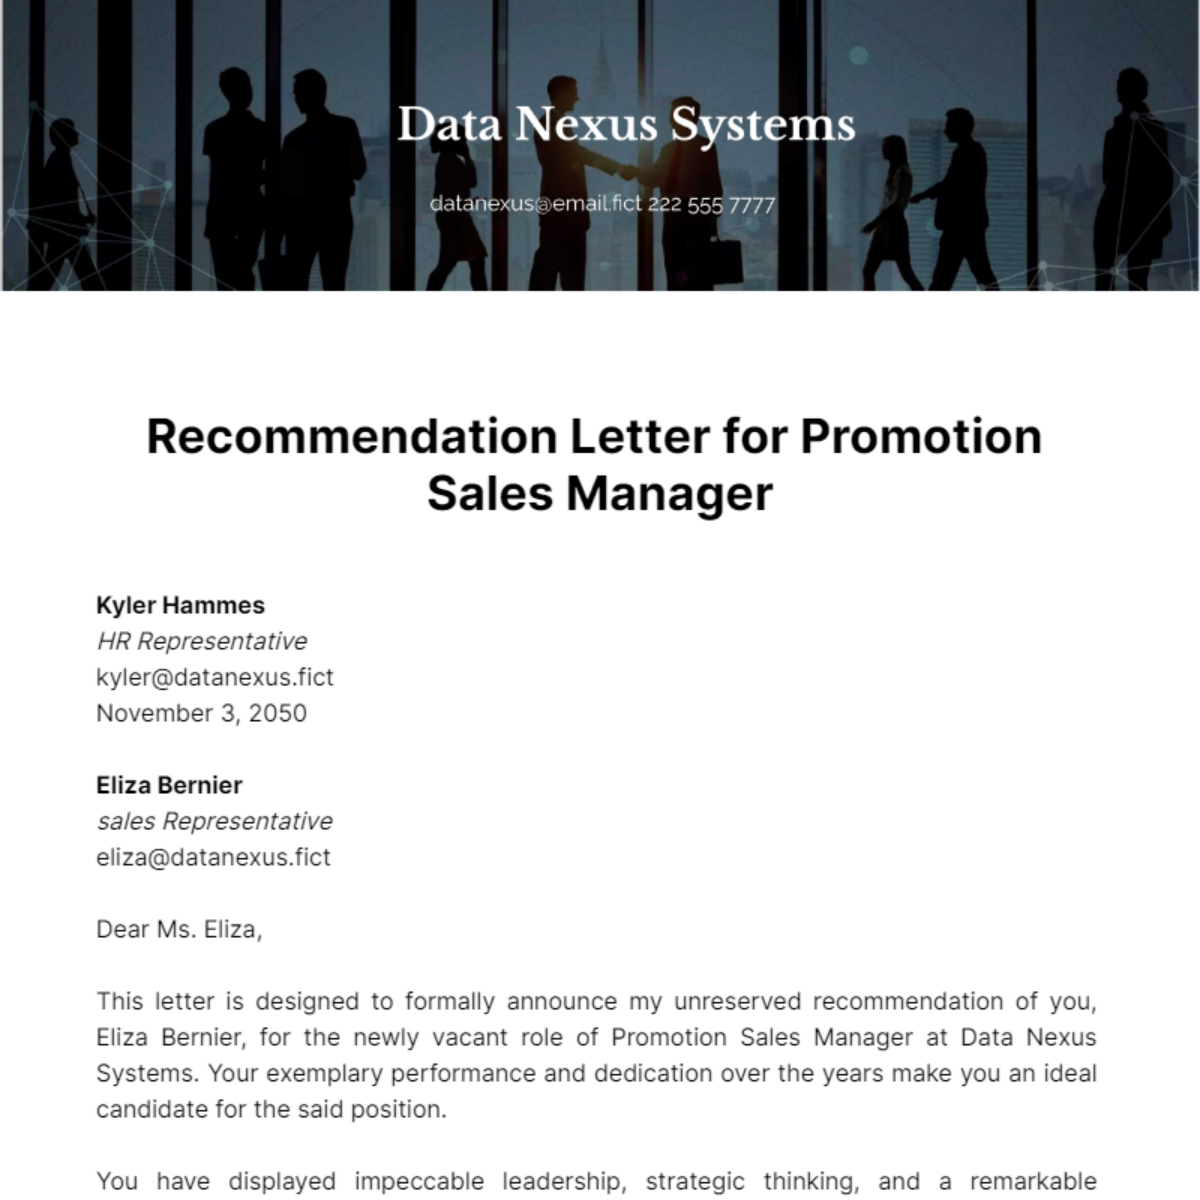 Recommendation Letter for Promotion Sales Manager Template